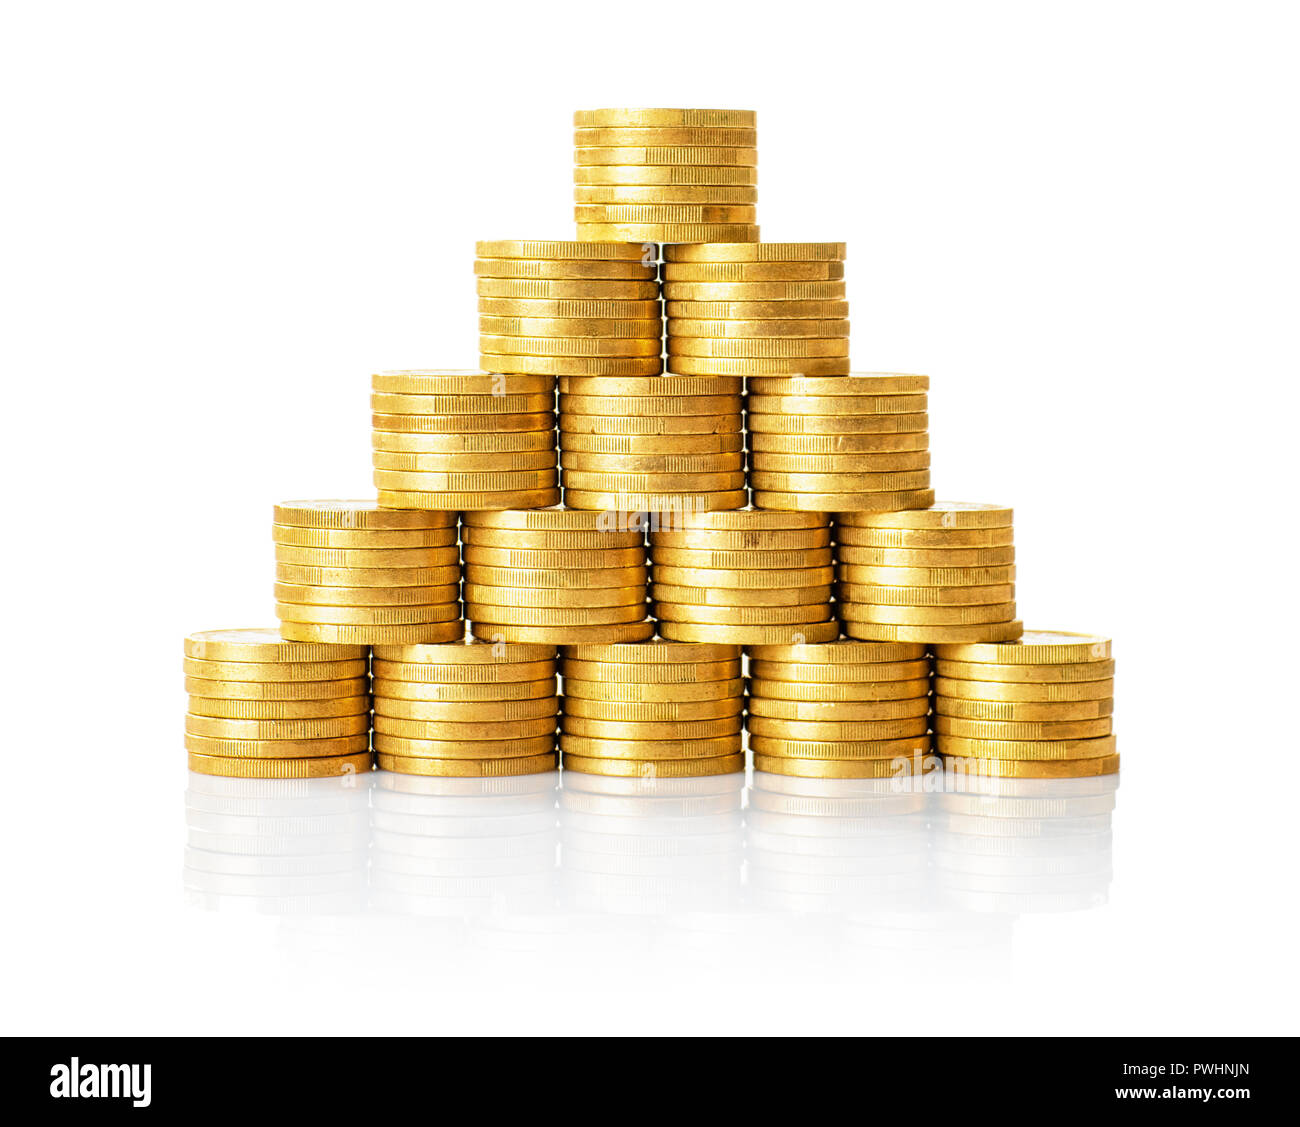 A pyramid of golden coins on a whithe background Stock Photo